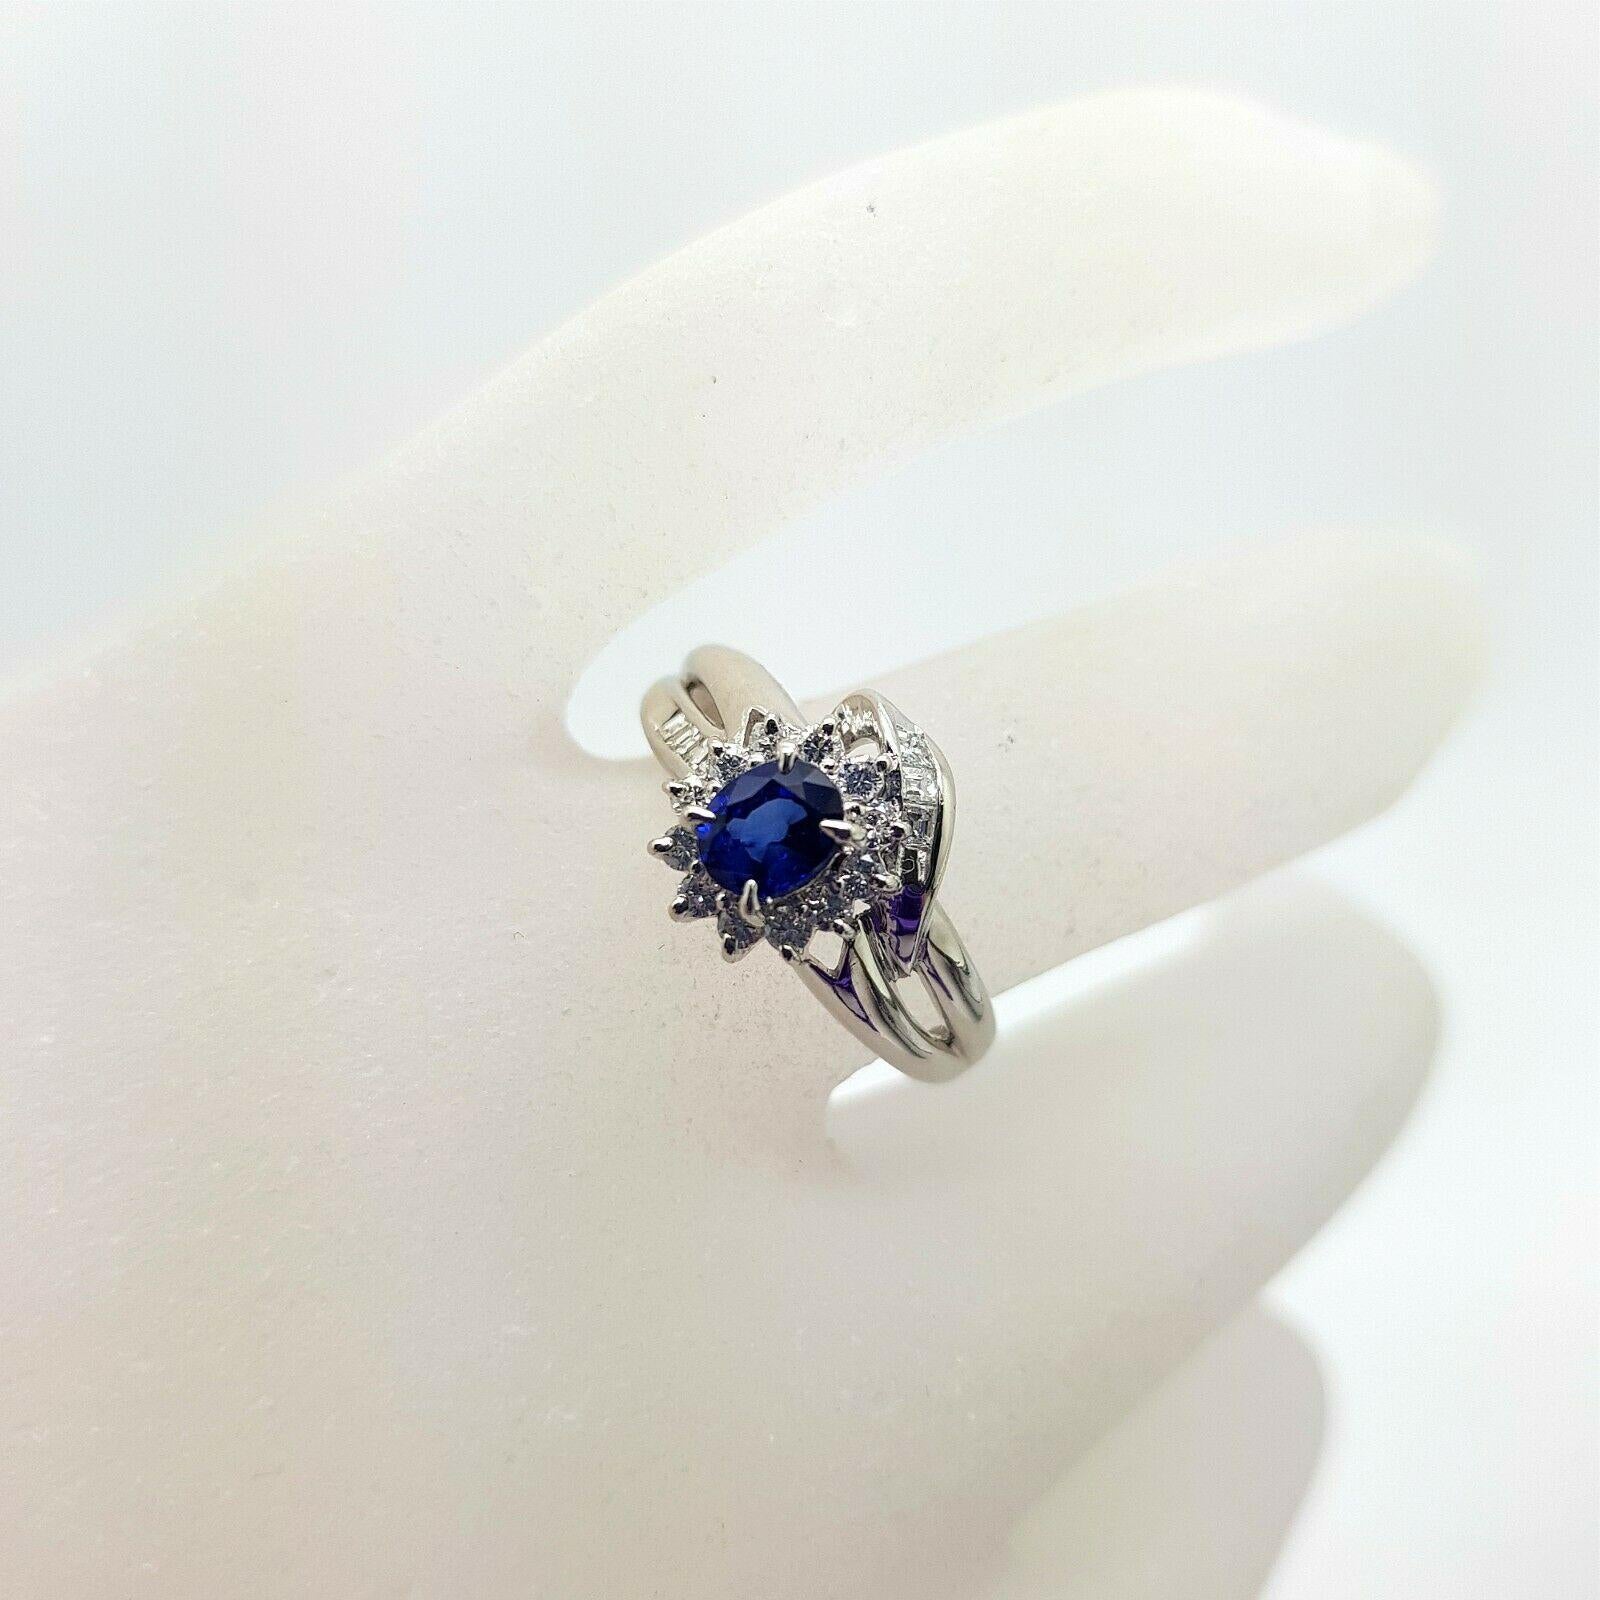  Specifications:
    main stone: BLUE SAPPHIRE  0.48 ct
    additional: ROUND DIAMONDS
    diamonds: 12 PCS
    carat total weight: 0.30
    color: n/a
    clarity: n/a
    brand: custom
    metal: PLATINUM PT900
    type: HALO
    weight: 4.70 gTW
